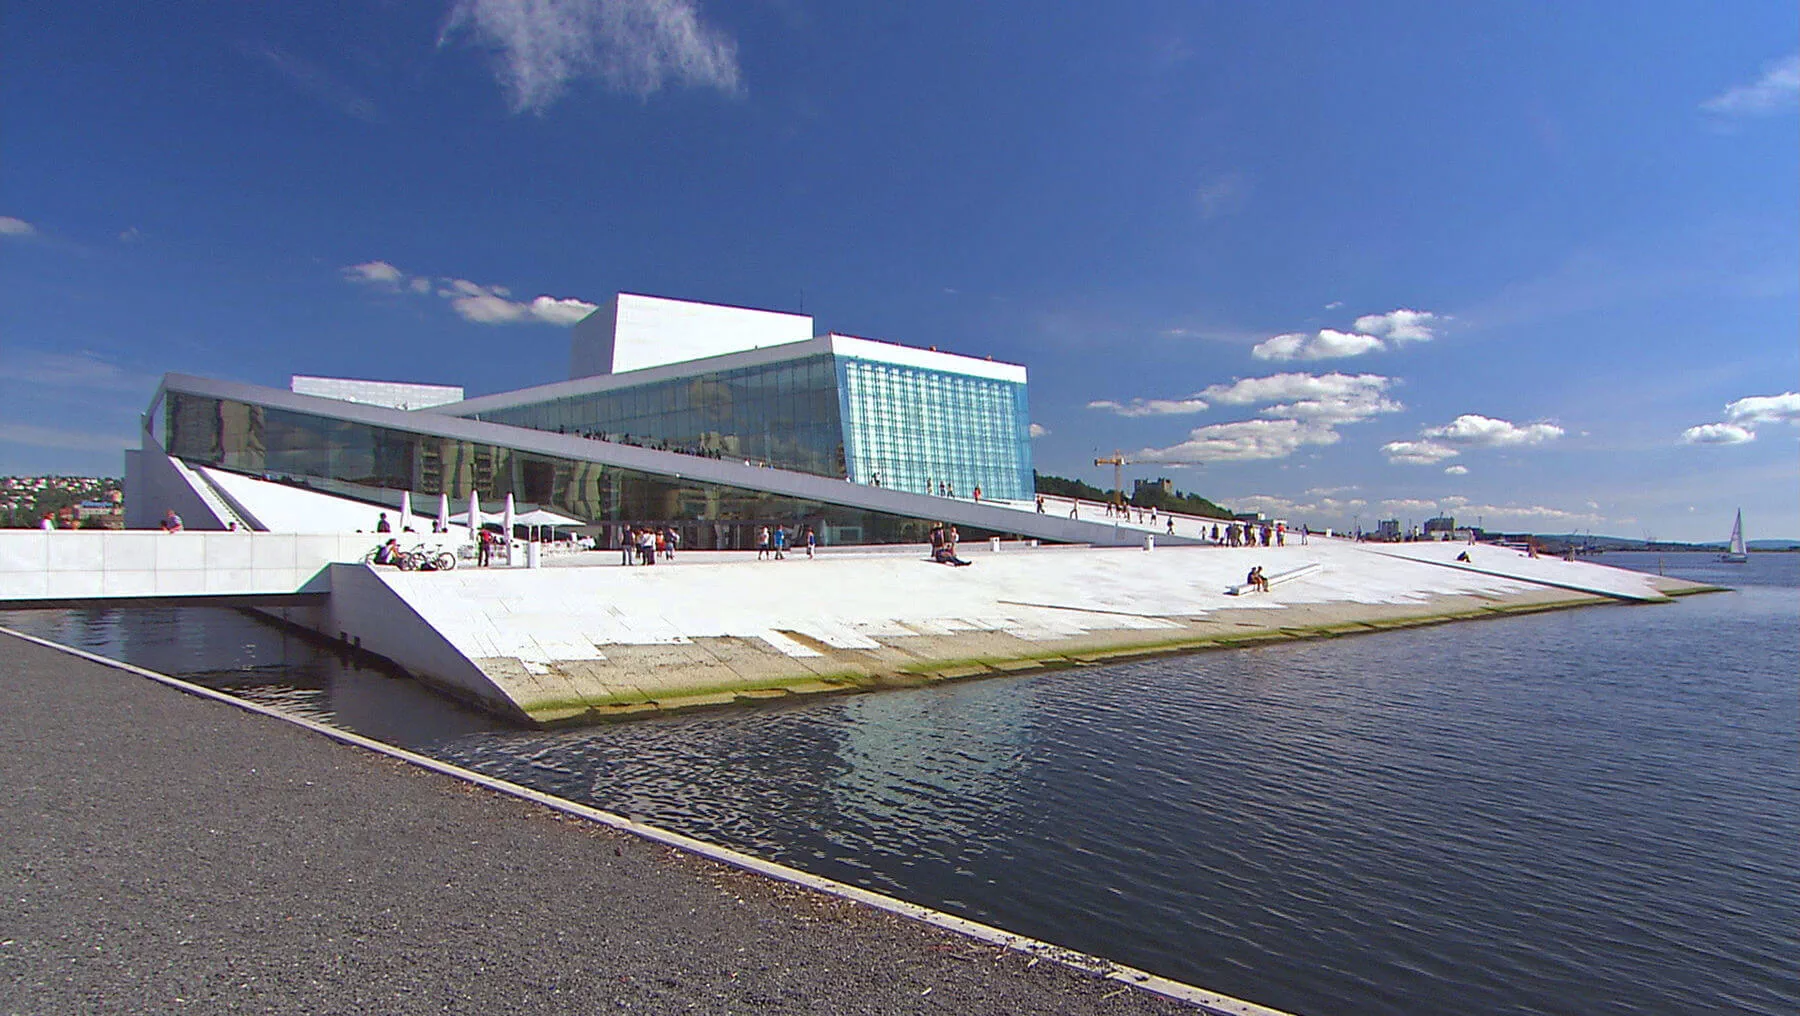 Oslo's Opera House rises from the water on the city’s eastern harbor